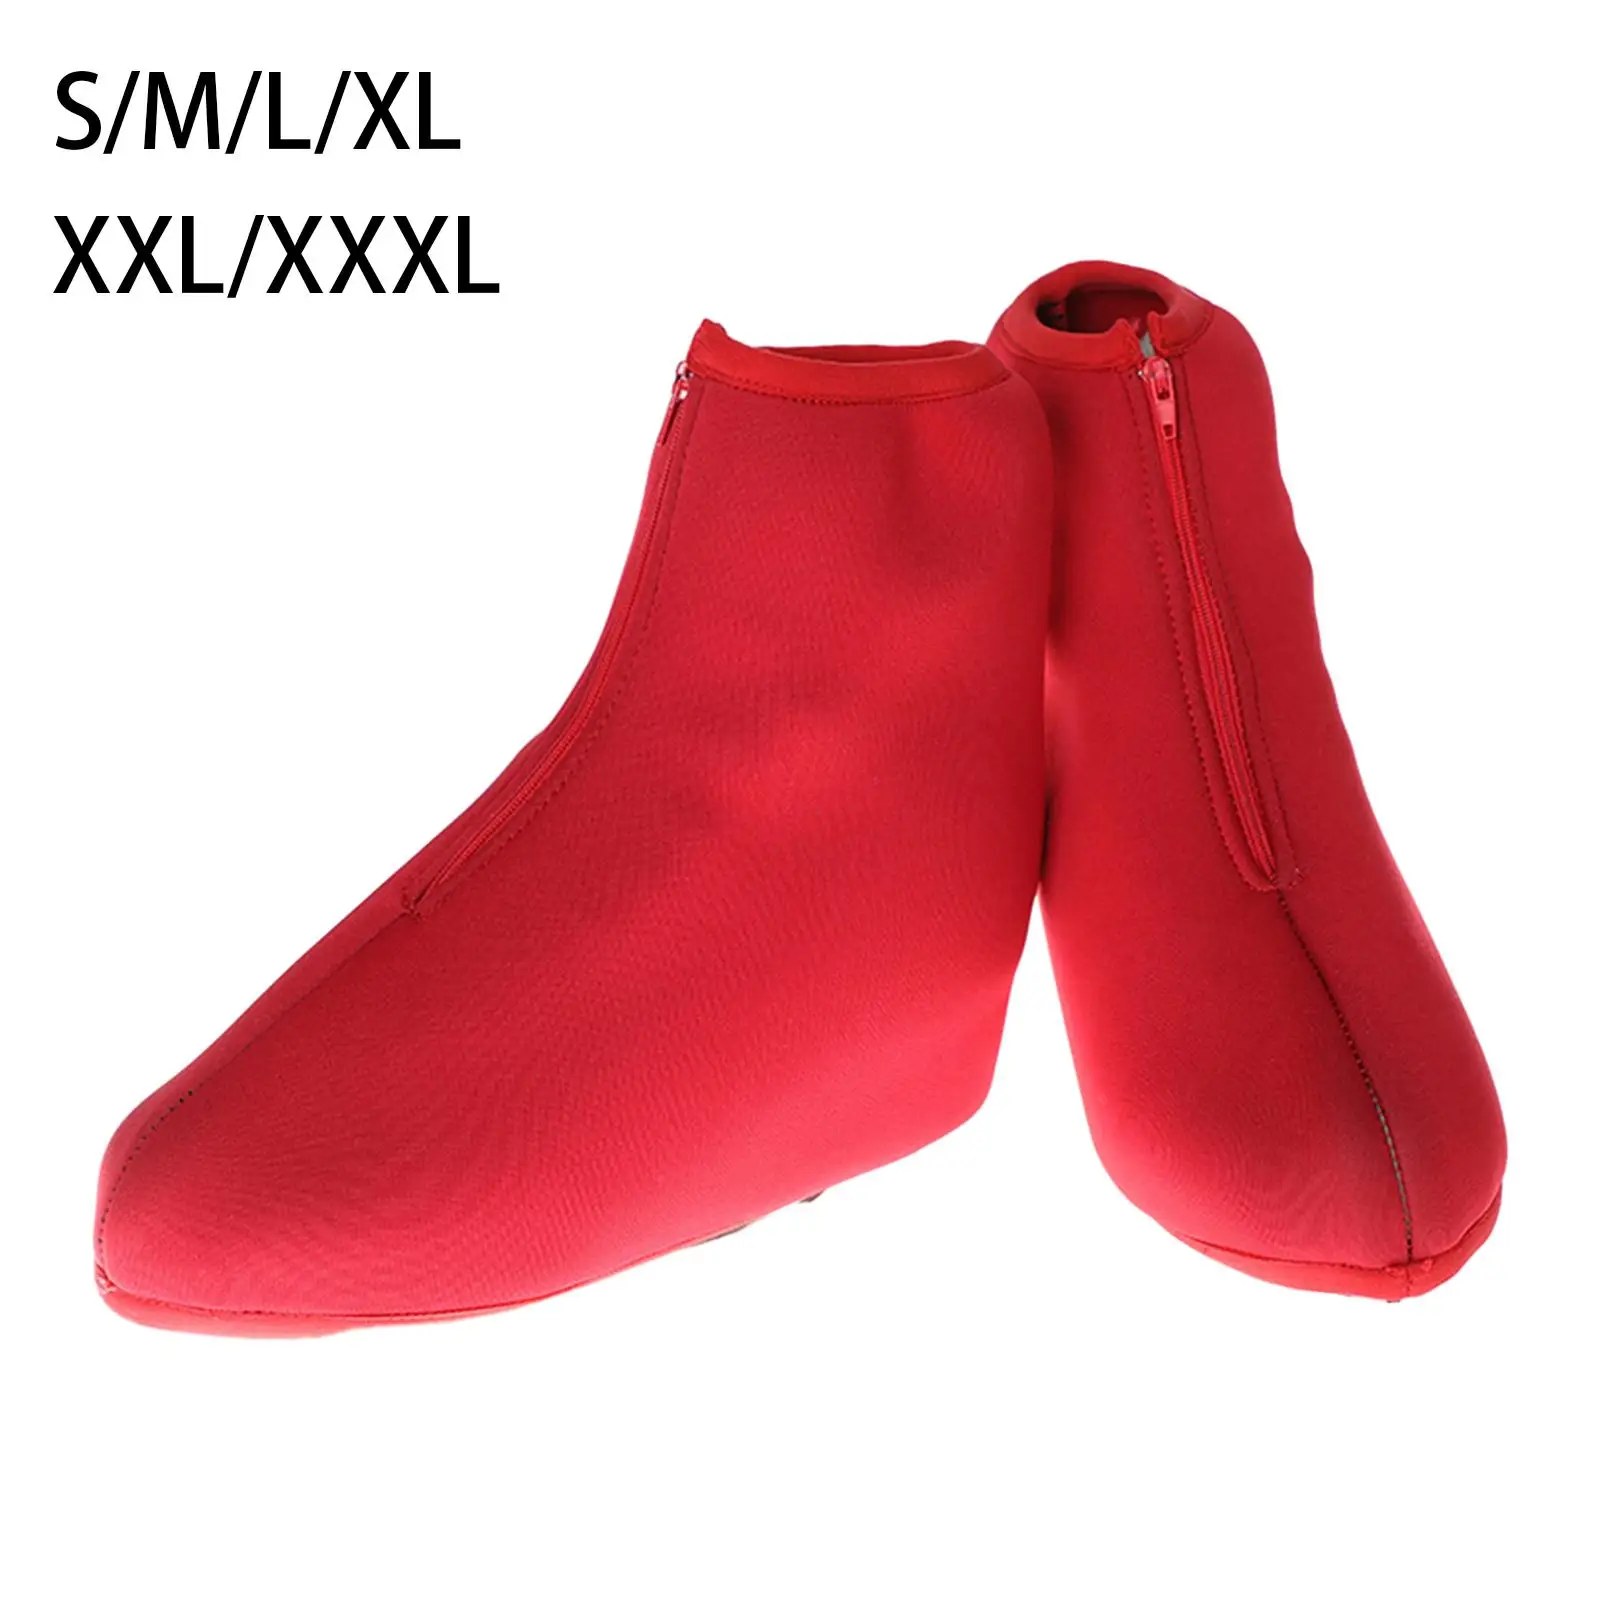 1 Pair Skate Boot Covers Overshoes Skating Boot Covers Durable Durable Shoes Protector Protective Men Women for Ice Skating